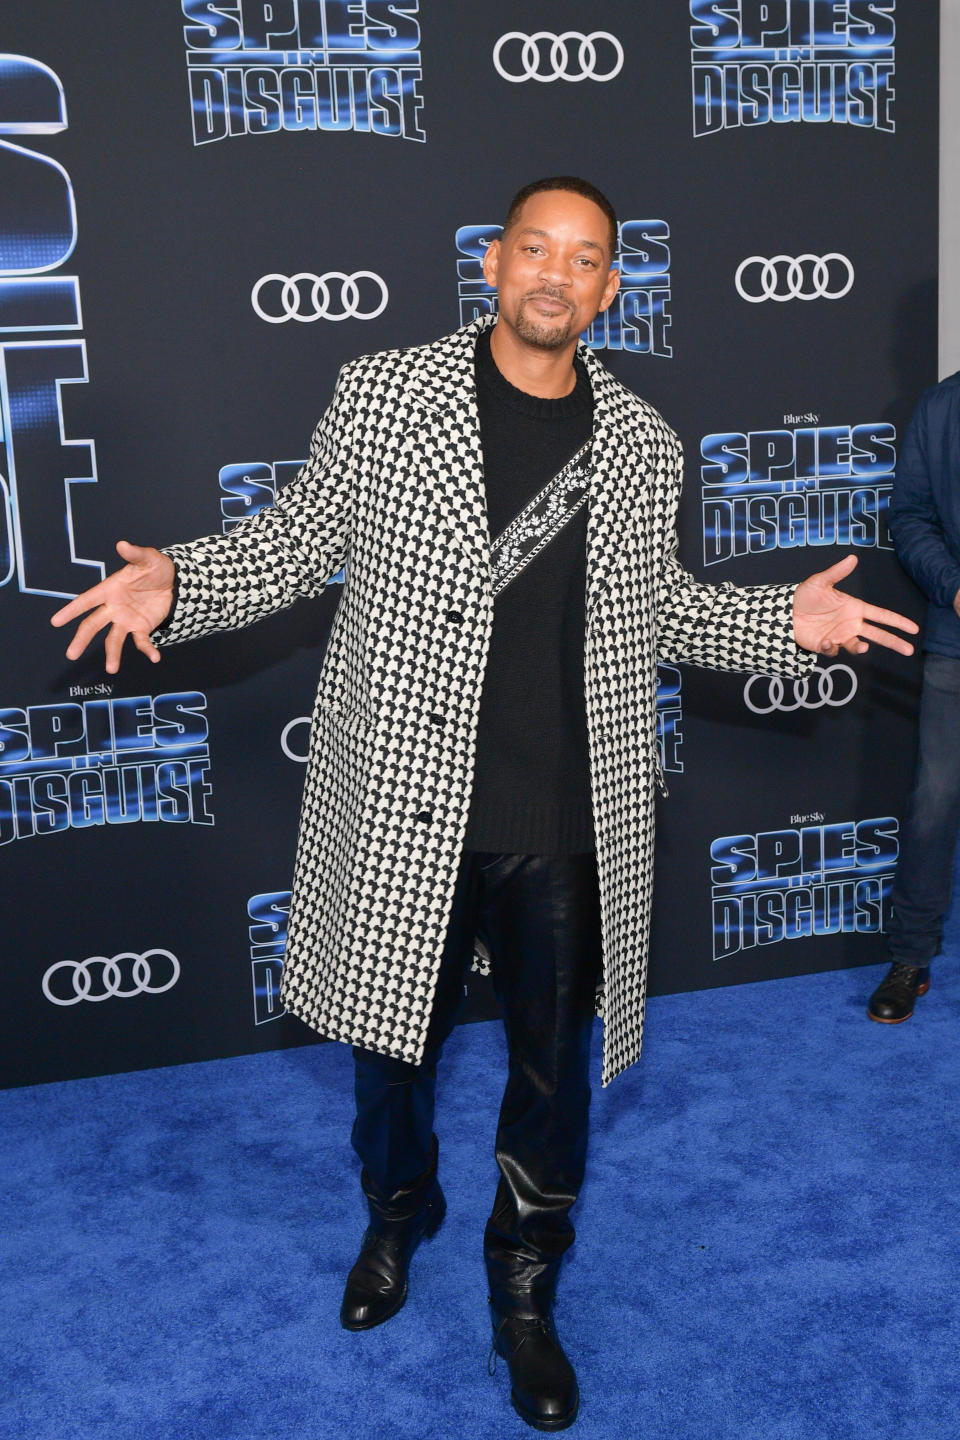 Will Smith at the premiere of "Spies in Disguise" in Los Angeles on Dec. 4.